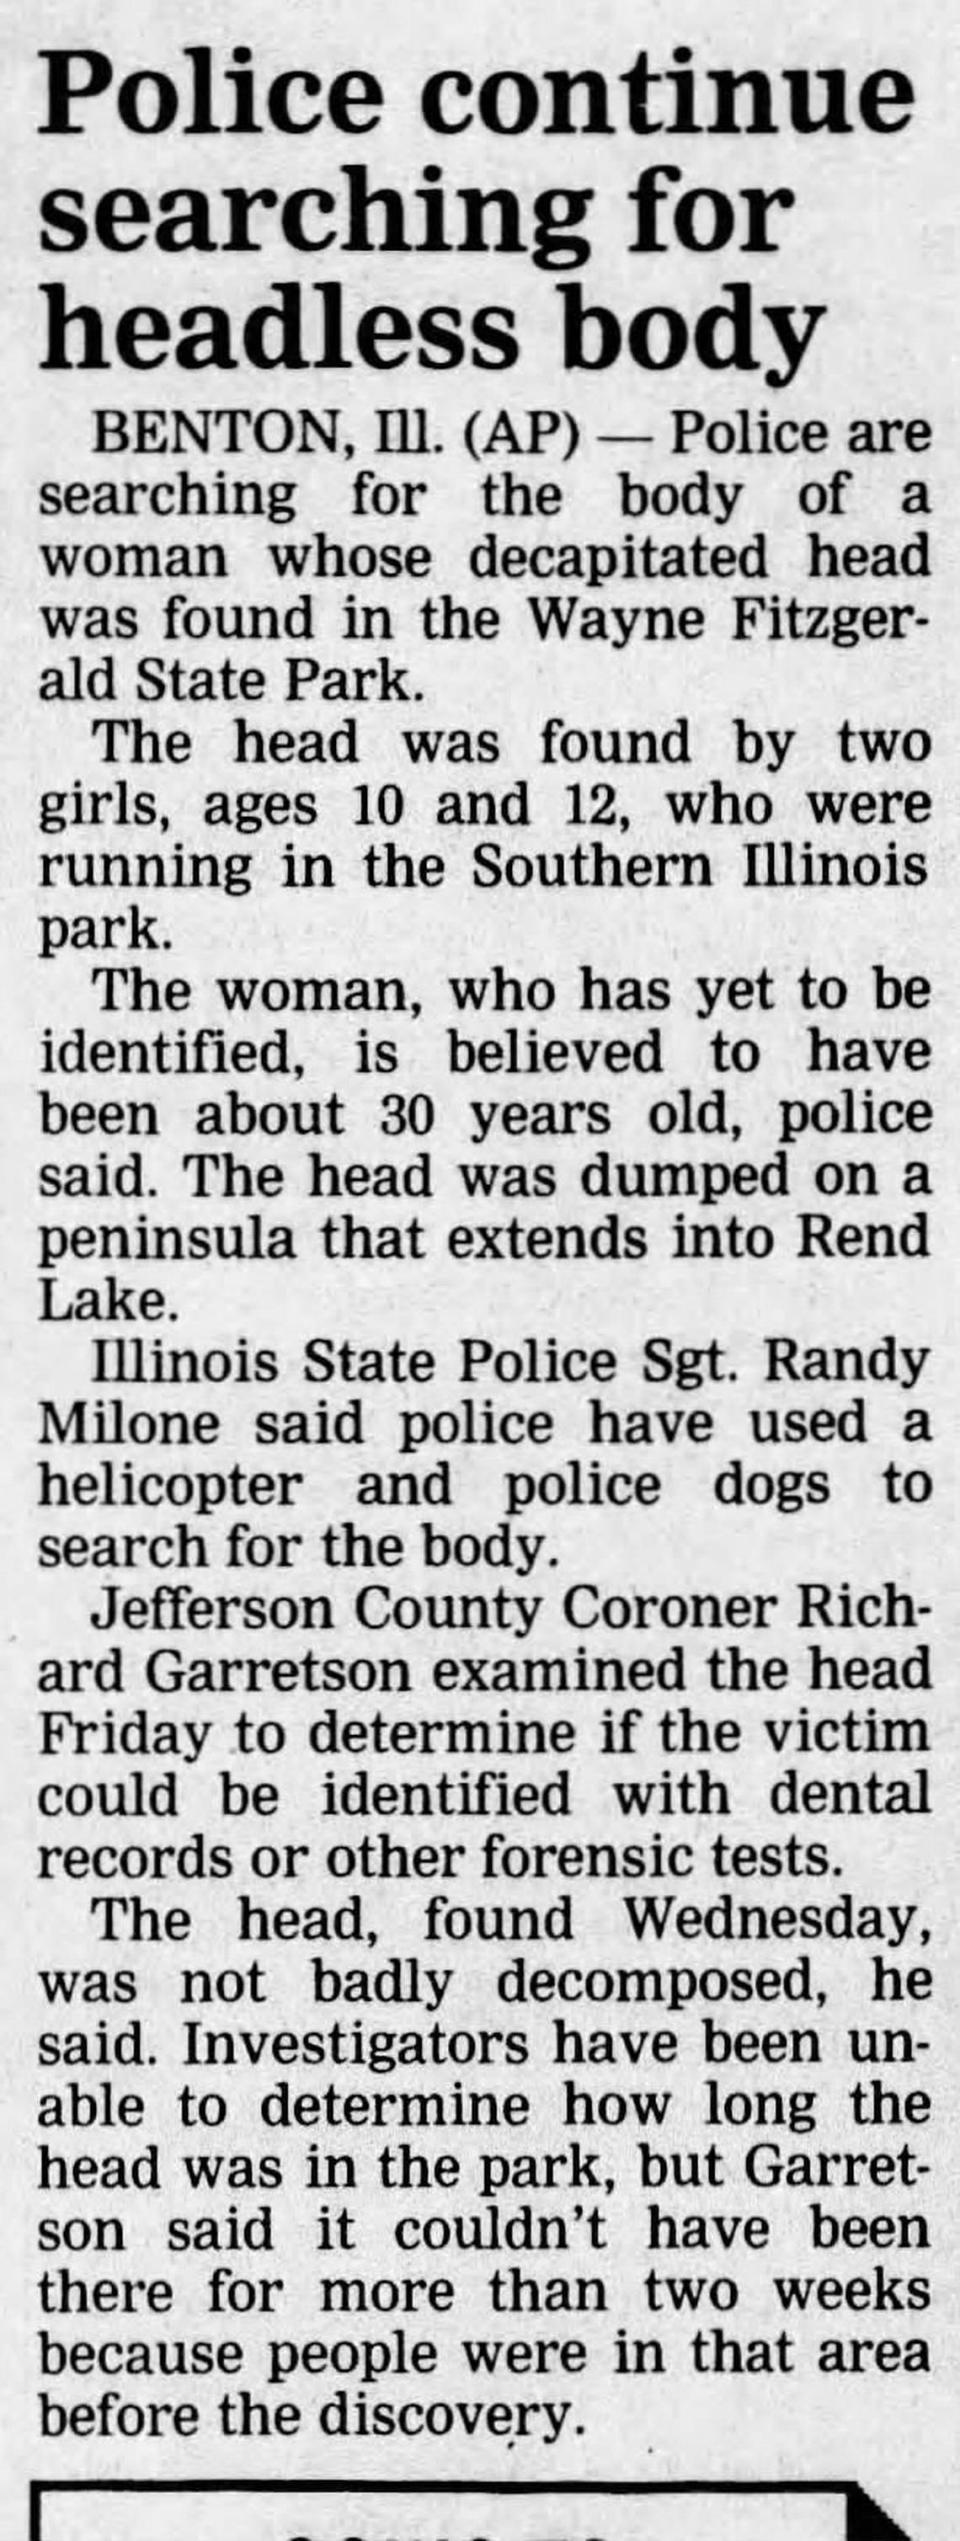 Original Associated Press article published in the The Post-Dispatch in the Jan. 31, 1993, edition.